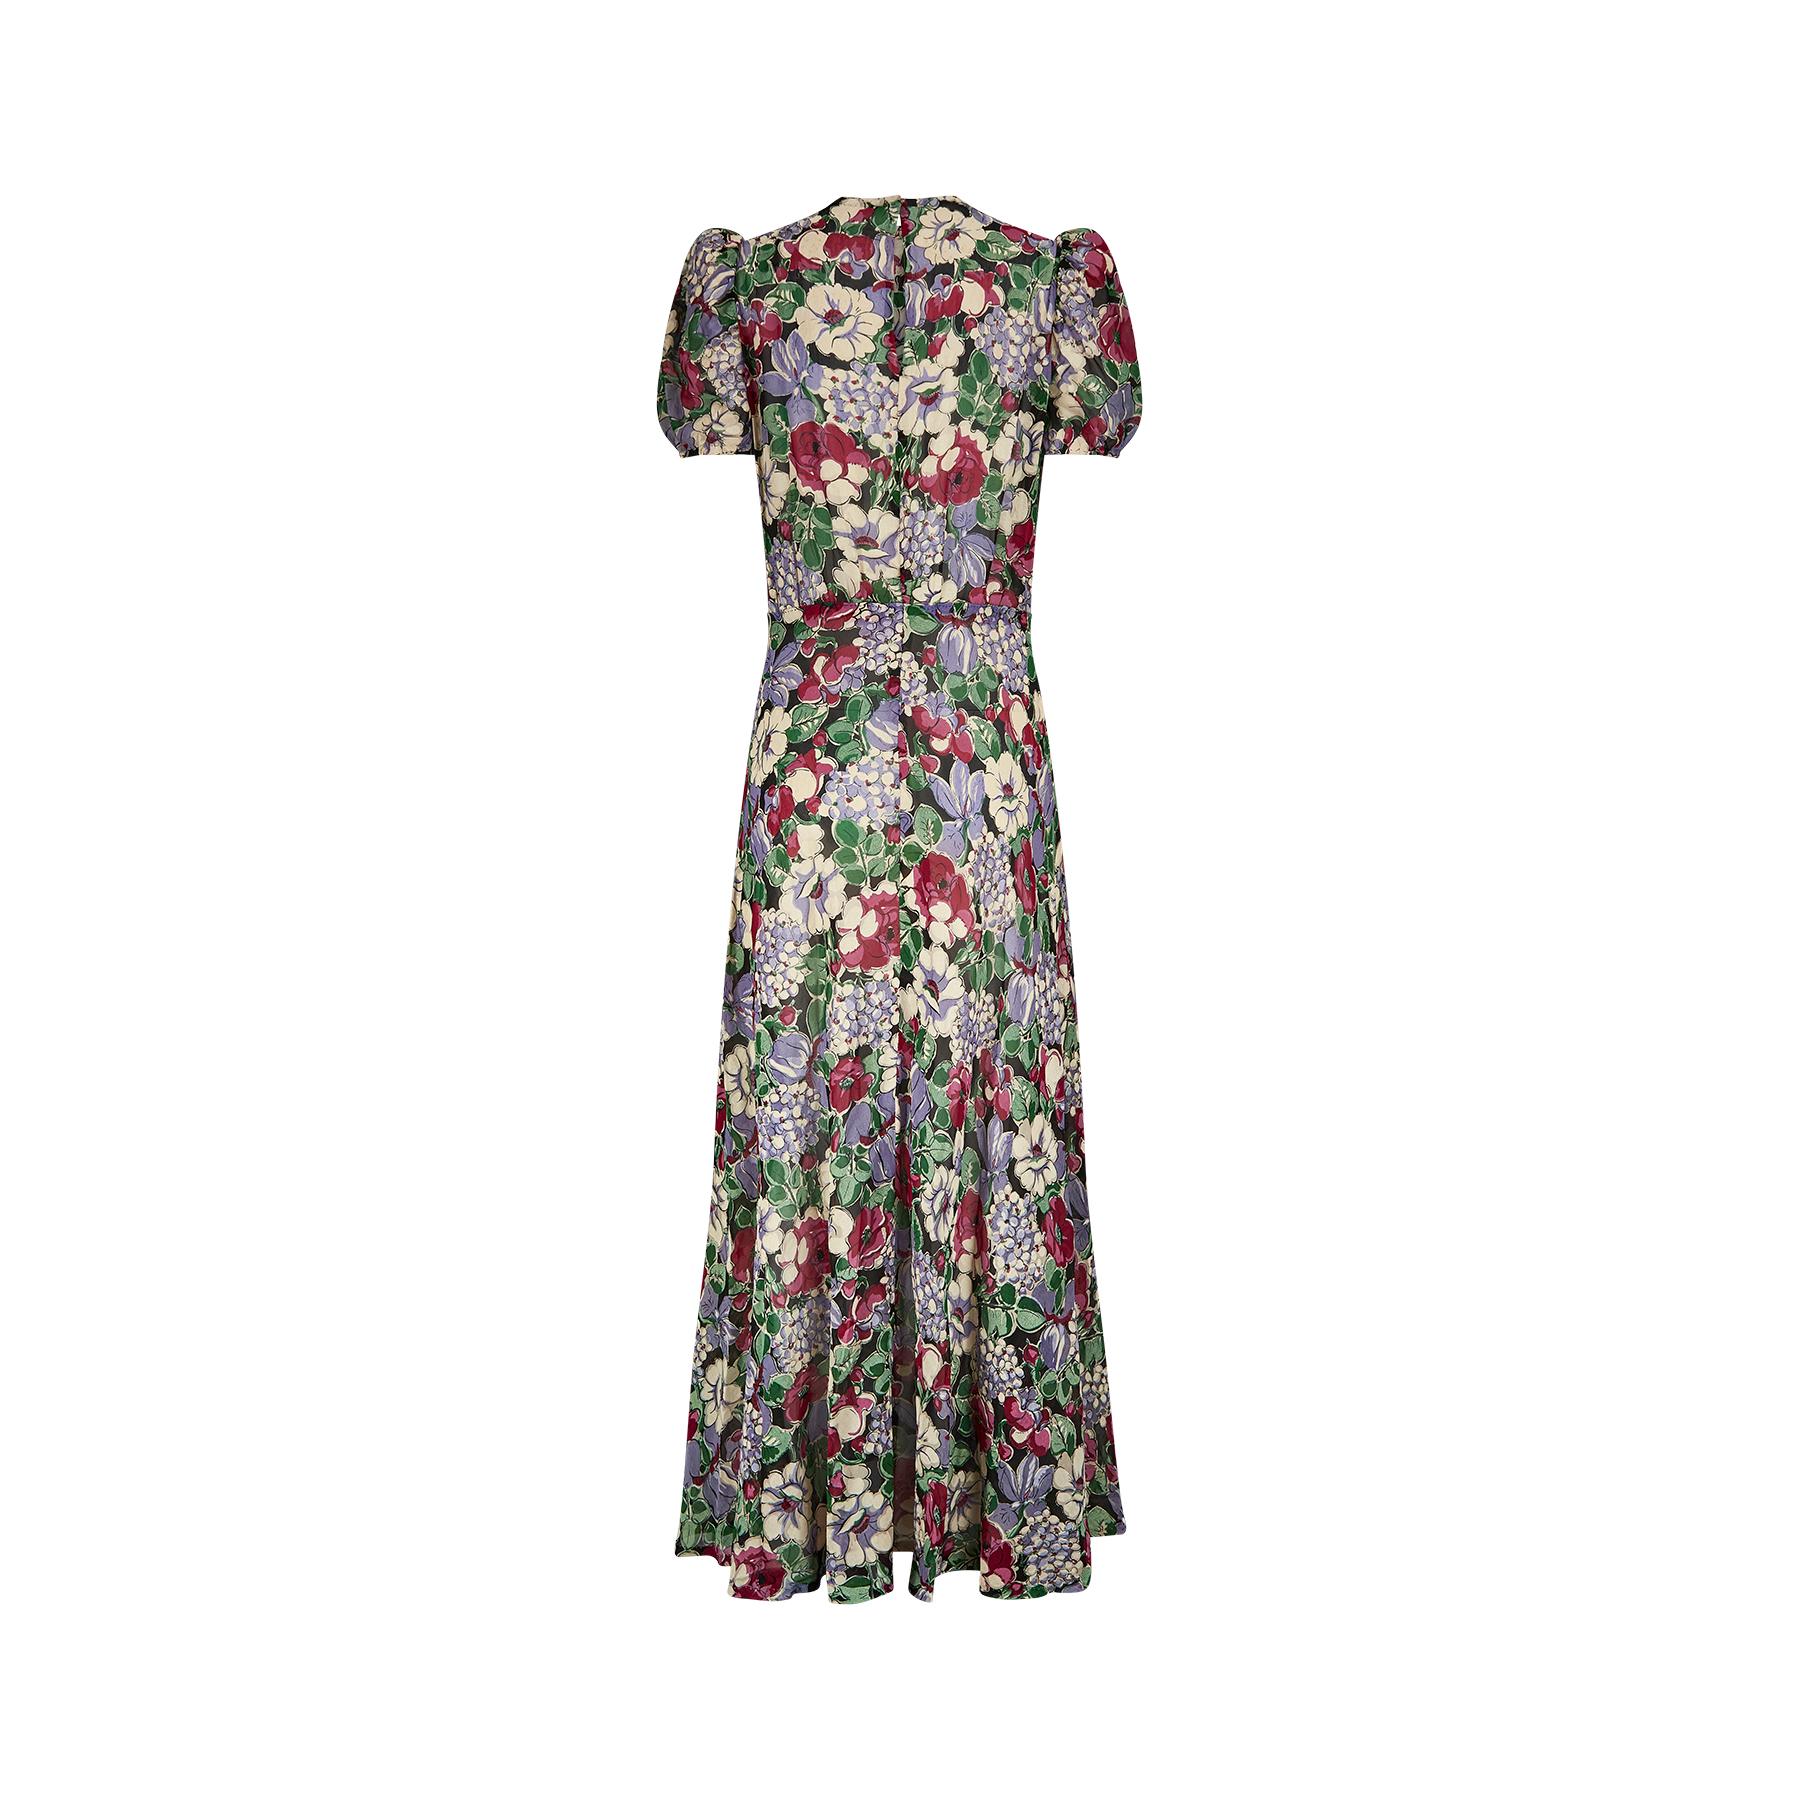 This is an exquisite example of 1930s fashion made from a wonderful floral cotton organza or stiffer georgette fabric. The colourful floral print showcases a mix of hydrangeas and old roses in lilacs, greens and pinks set against a midnight